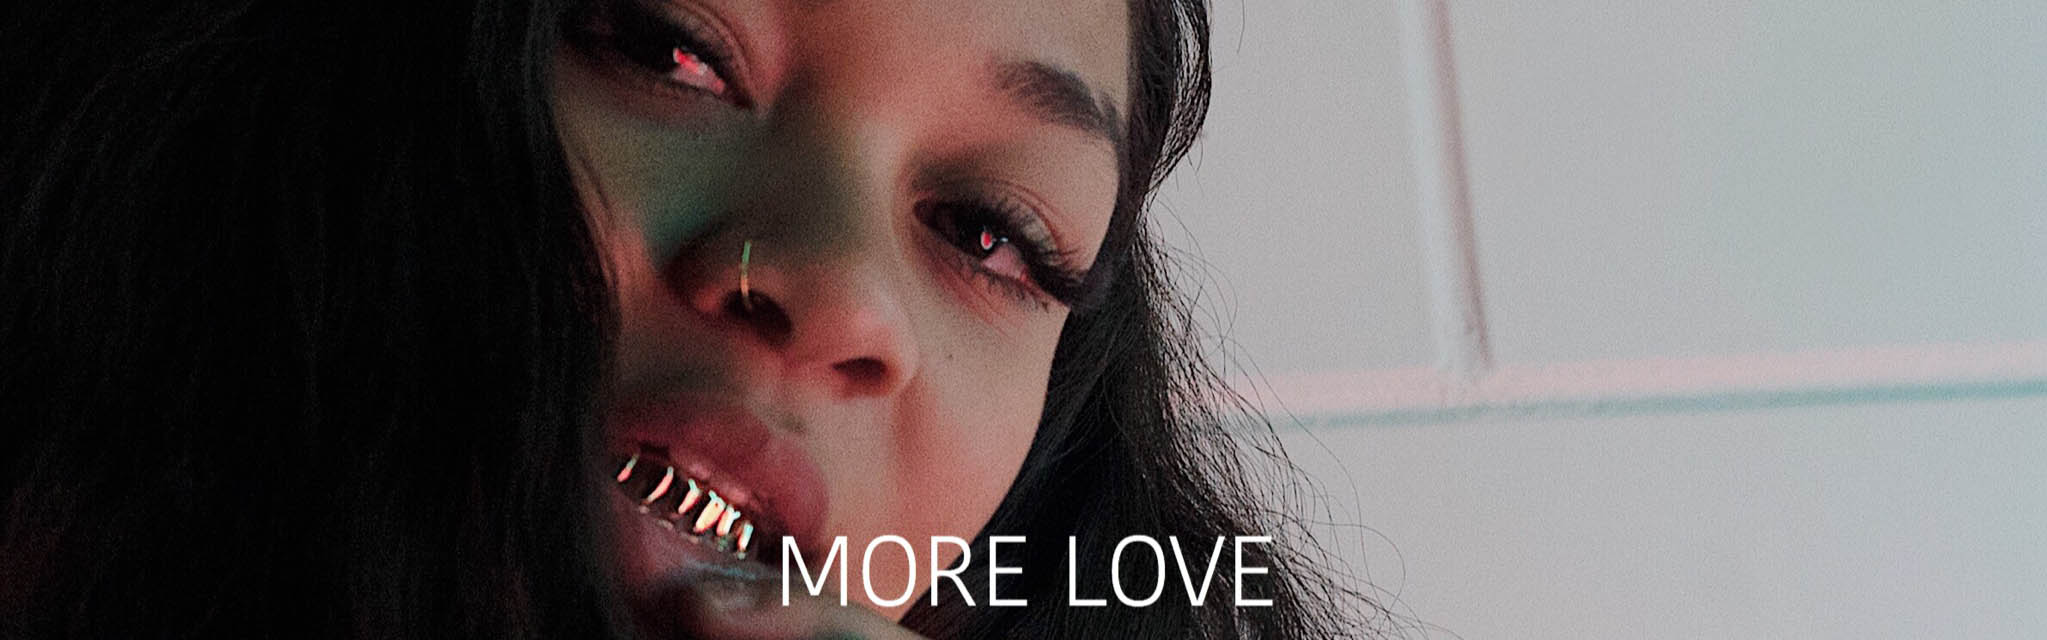 Wolftyla More love